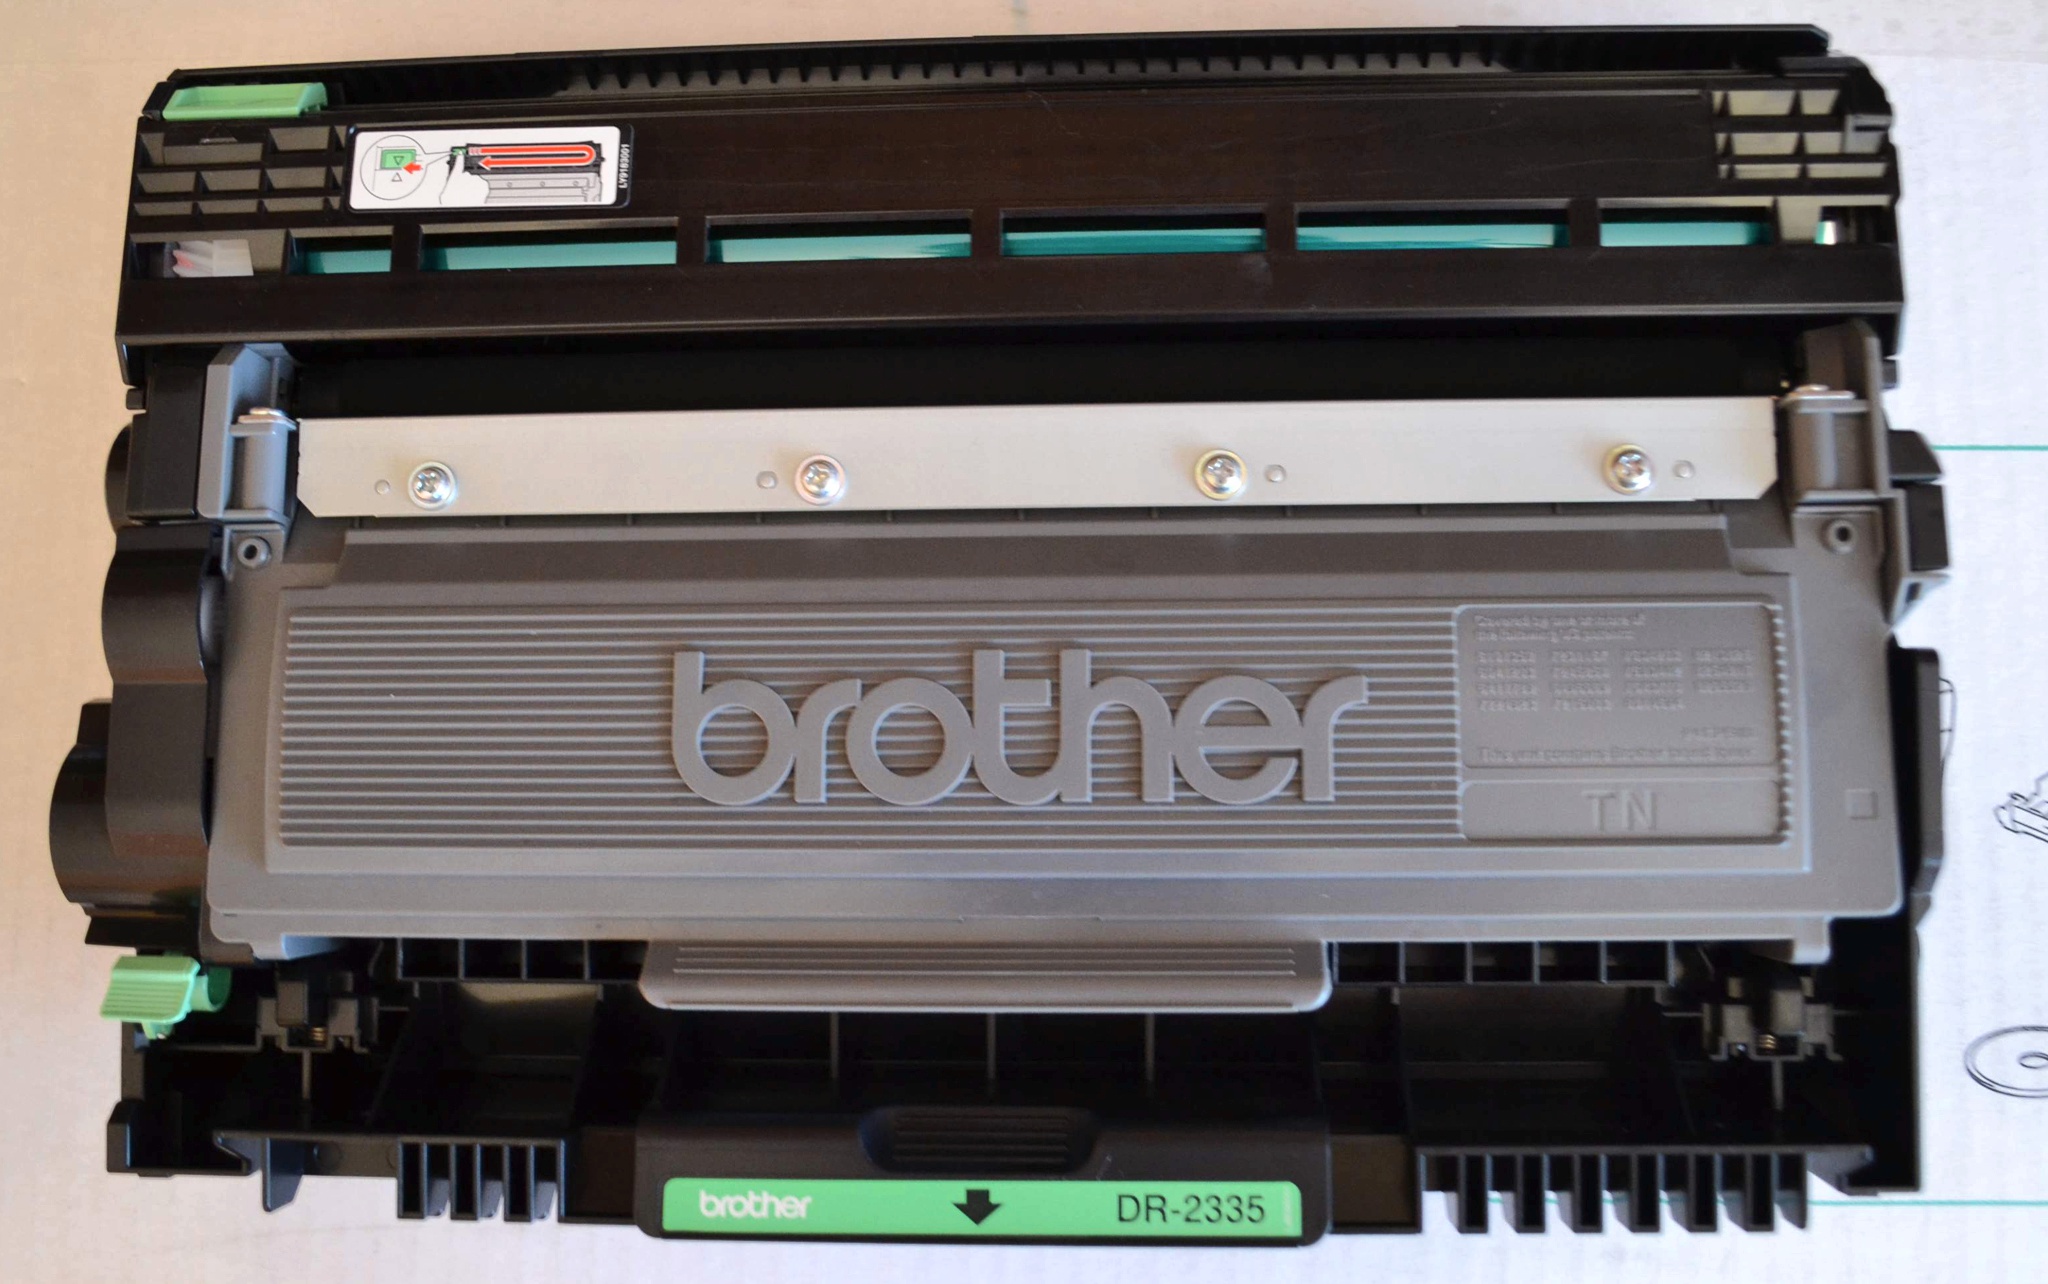 Brother l2500. Принтер brother DCP l2500dr. Brother DCP-l2500. Brother DCP-l2500dr. Brother DCP 2500 картридж.